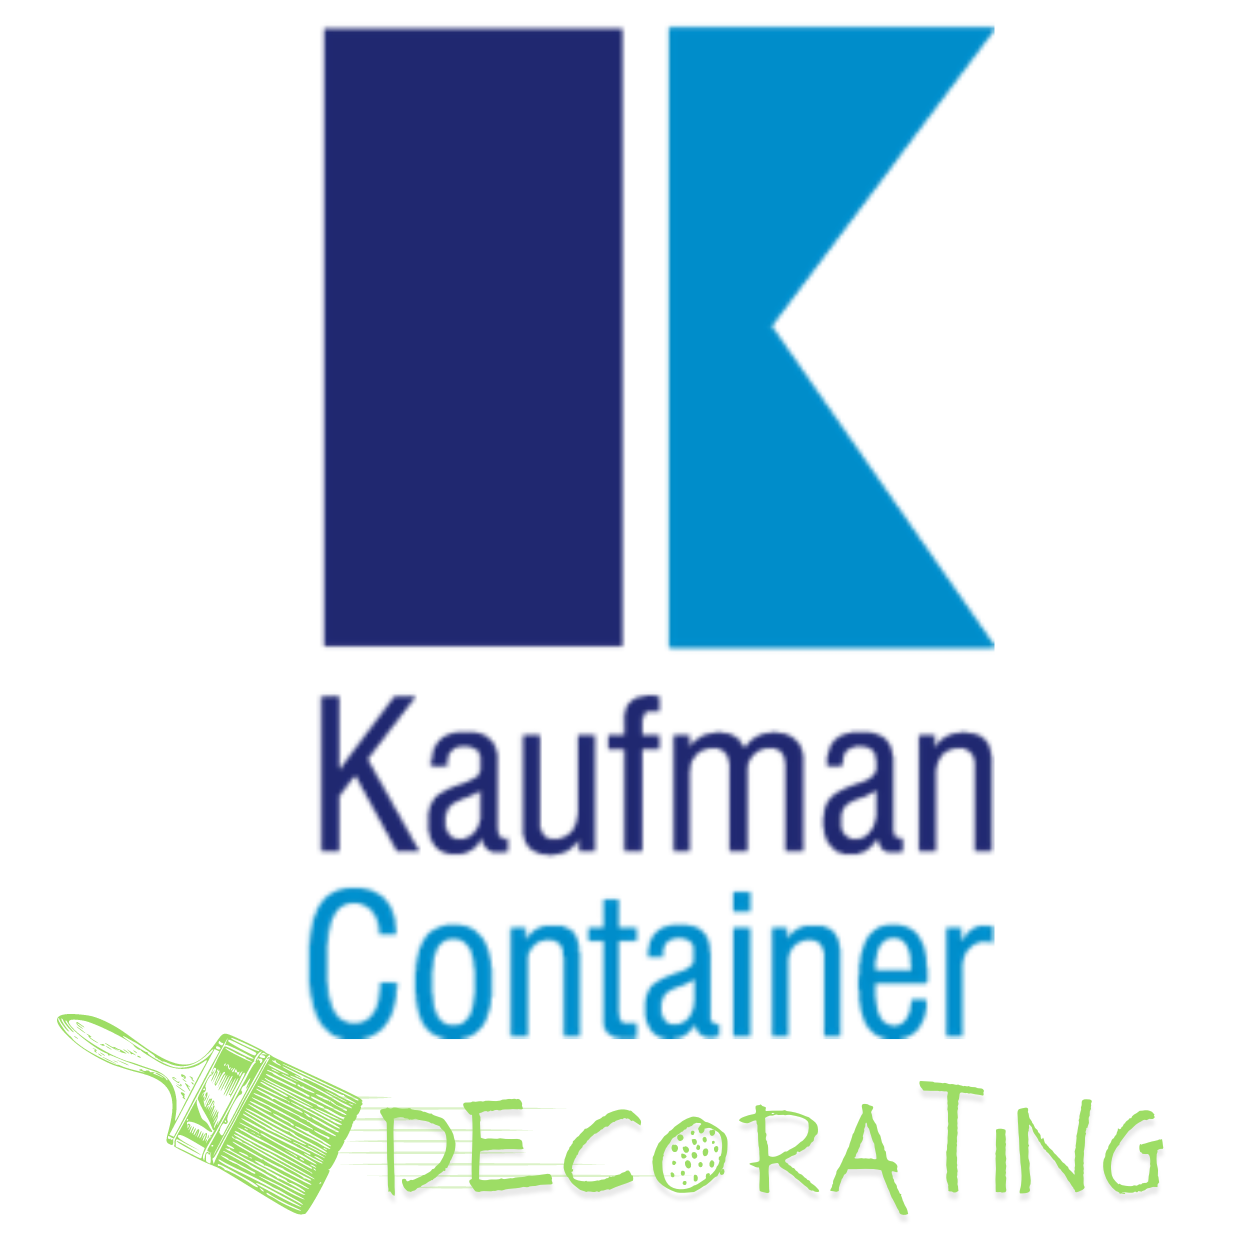 Kuafman Container Decorating Square